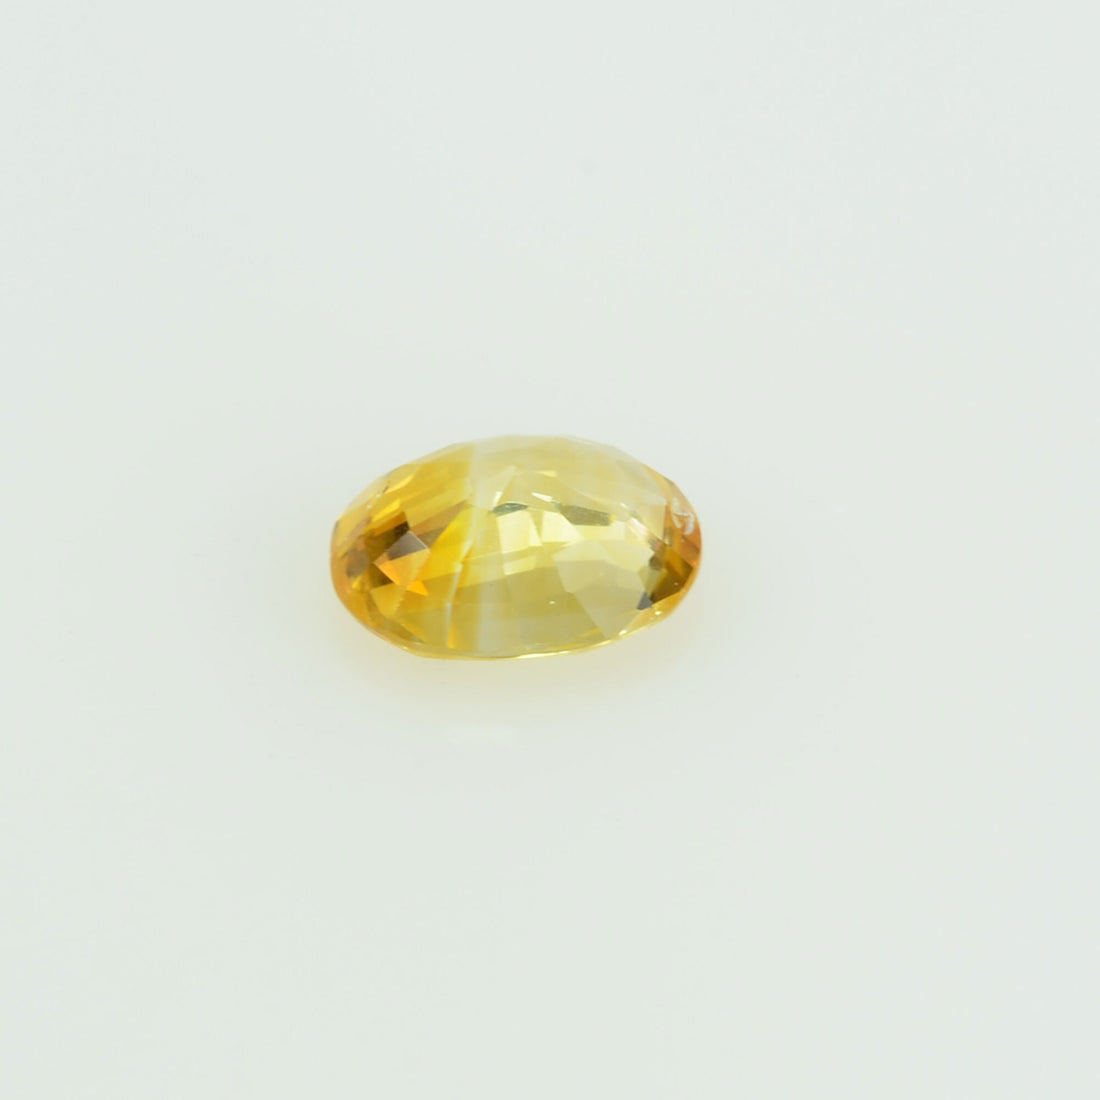 0.50 Cts Natural Yellow Sapphire Loose Gemstone Oval Cut